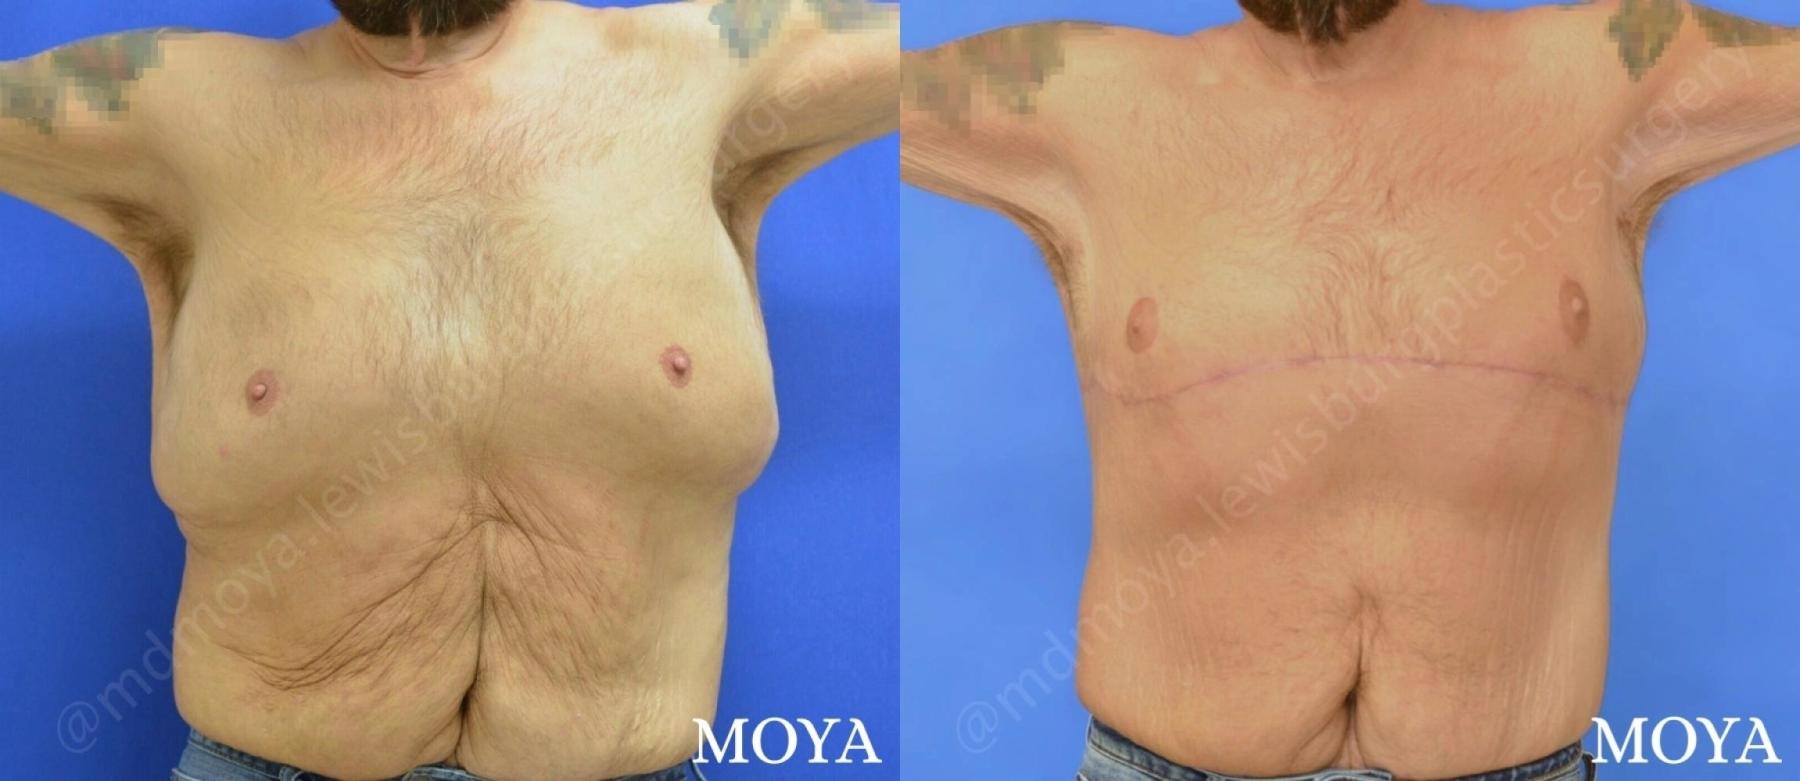 Male Upper Body Lift: Patient 1 - Before and After 2